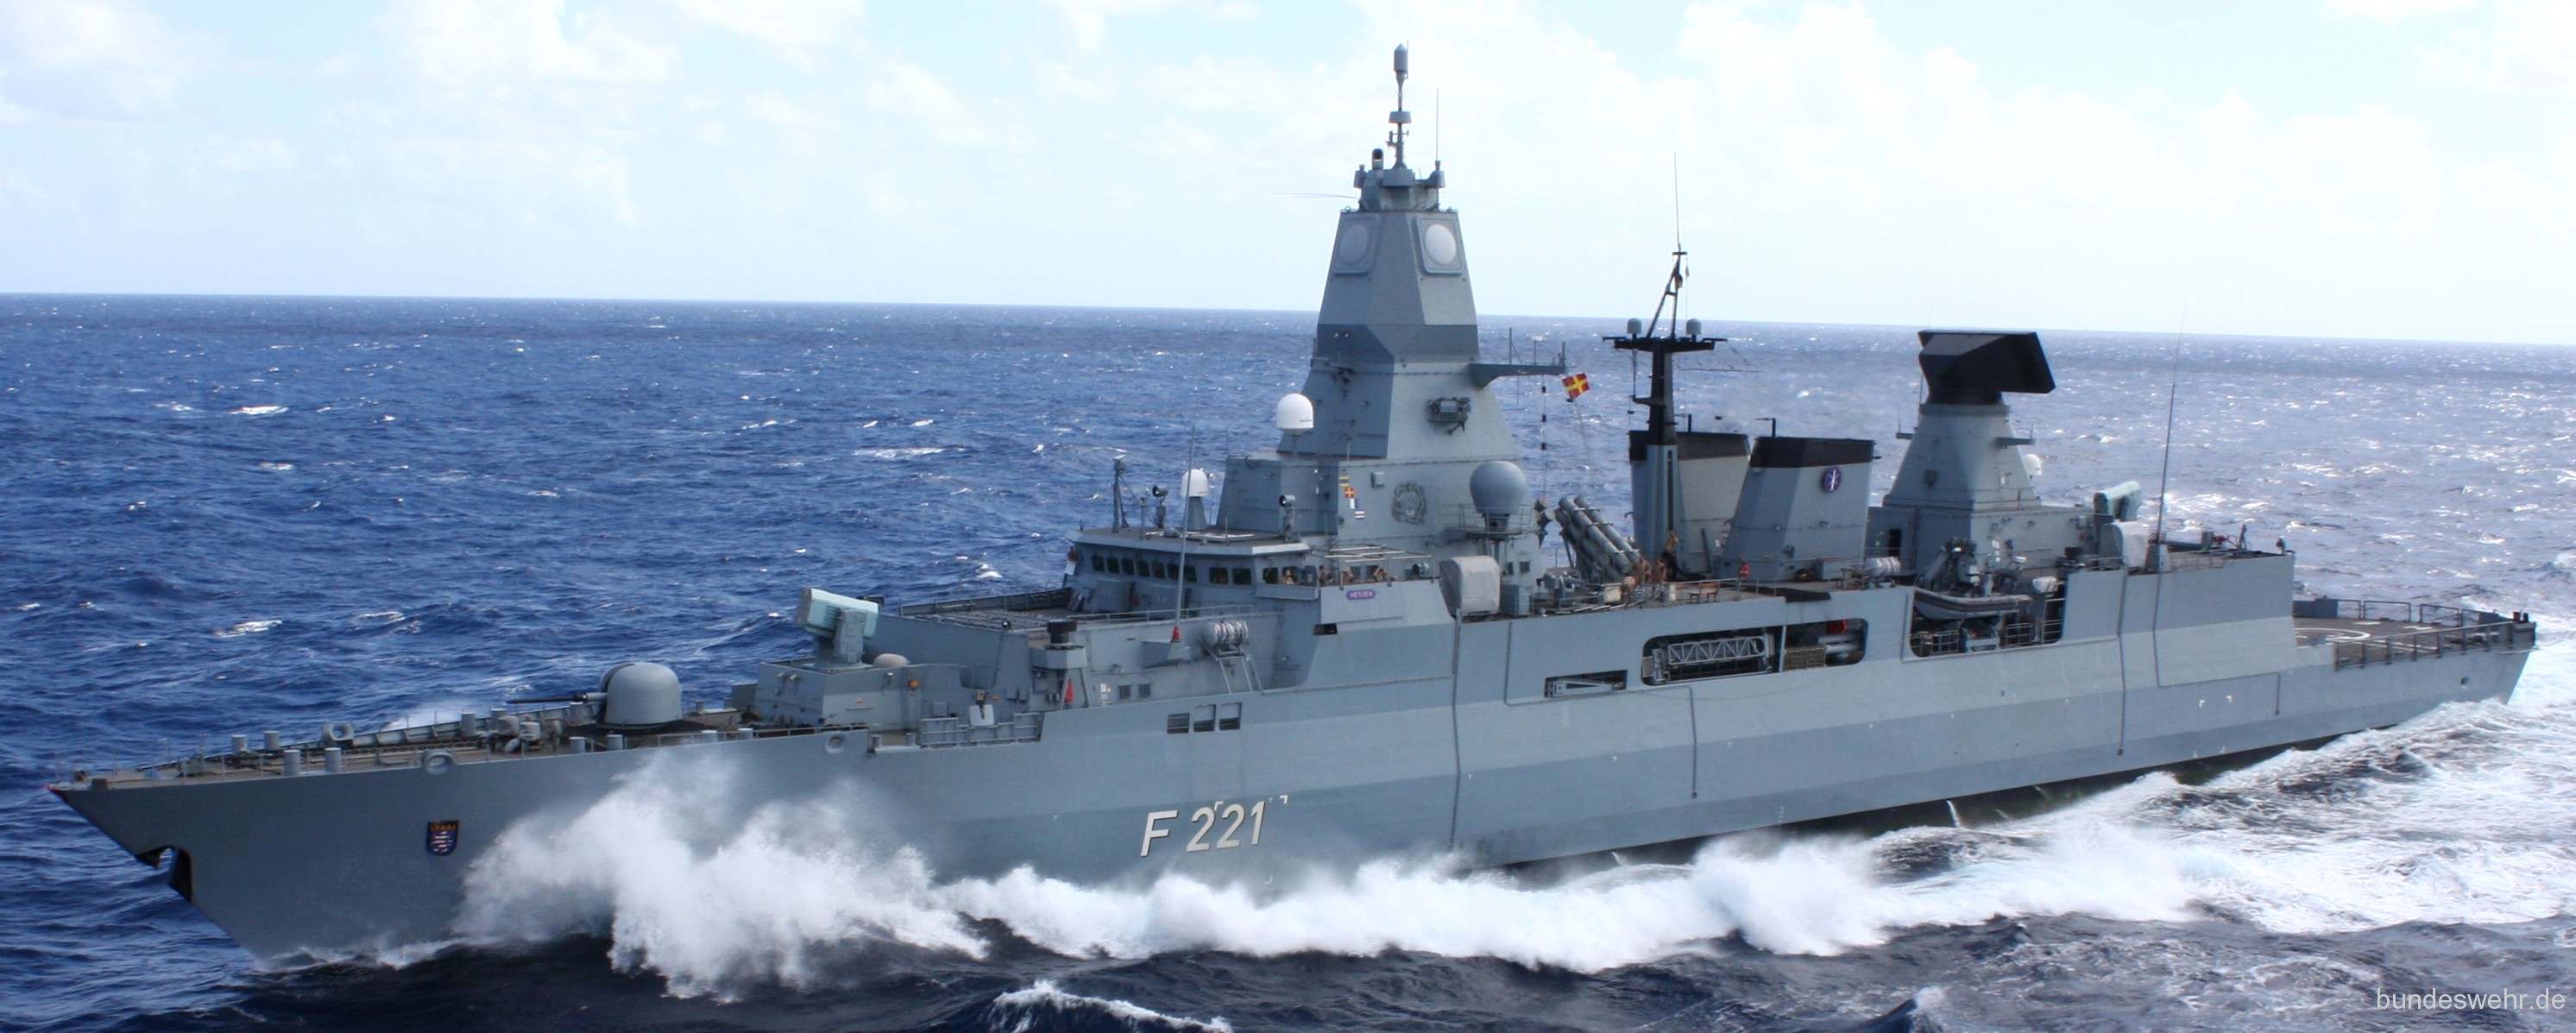 f-221 fgs hessen type 124 sachsen class guided missile frigate german navy 03